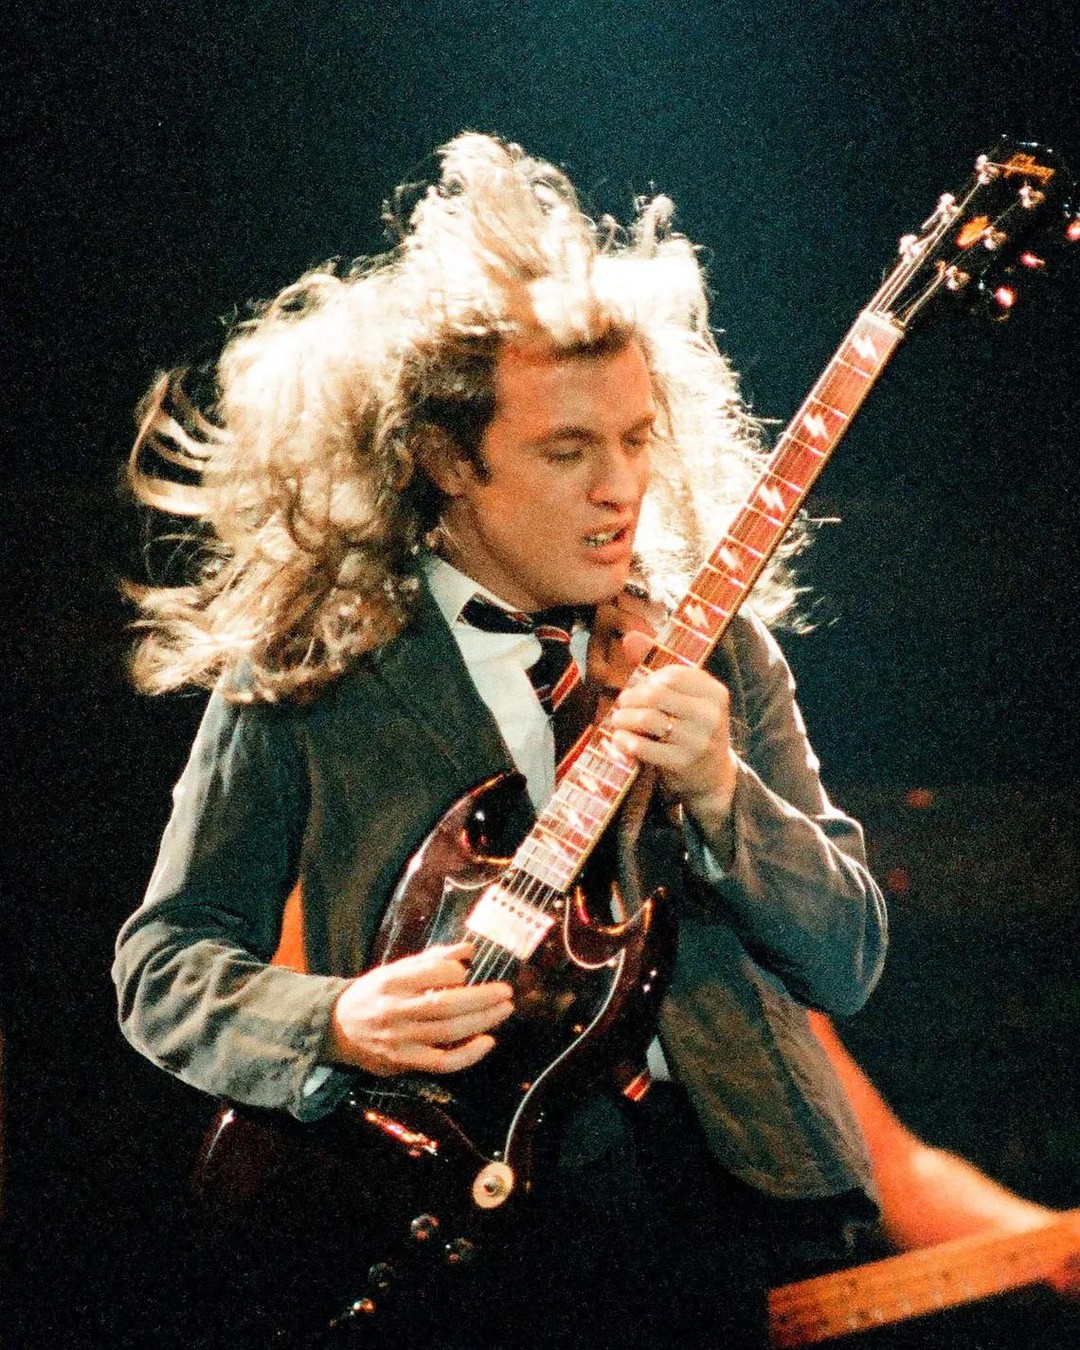 Happy 67th birthday to one of our favourite guitarists Angus Young! 

What’s your favourite AC/DC song?